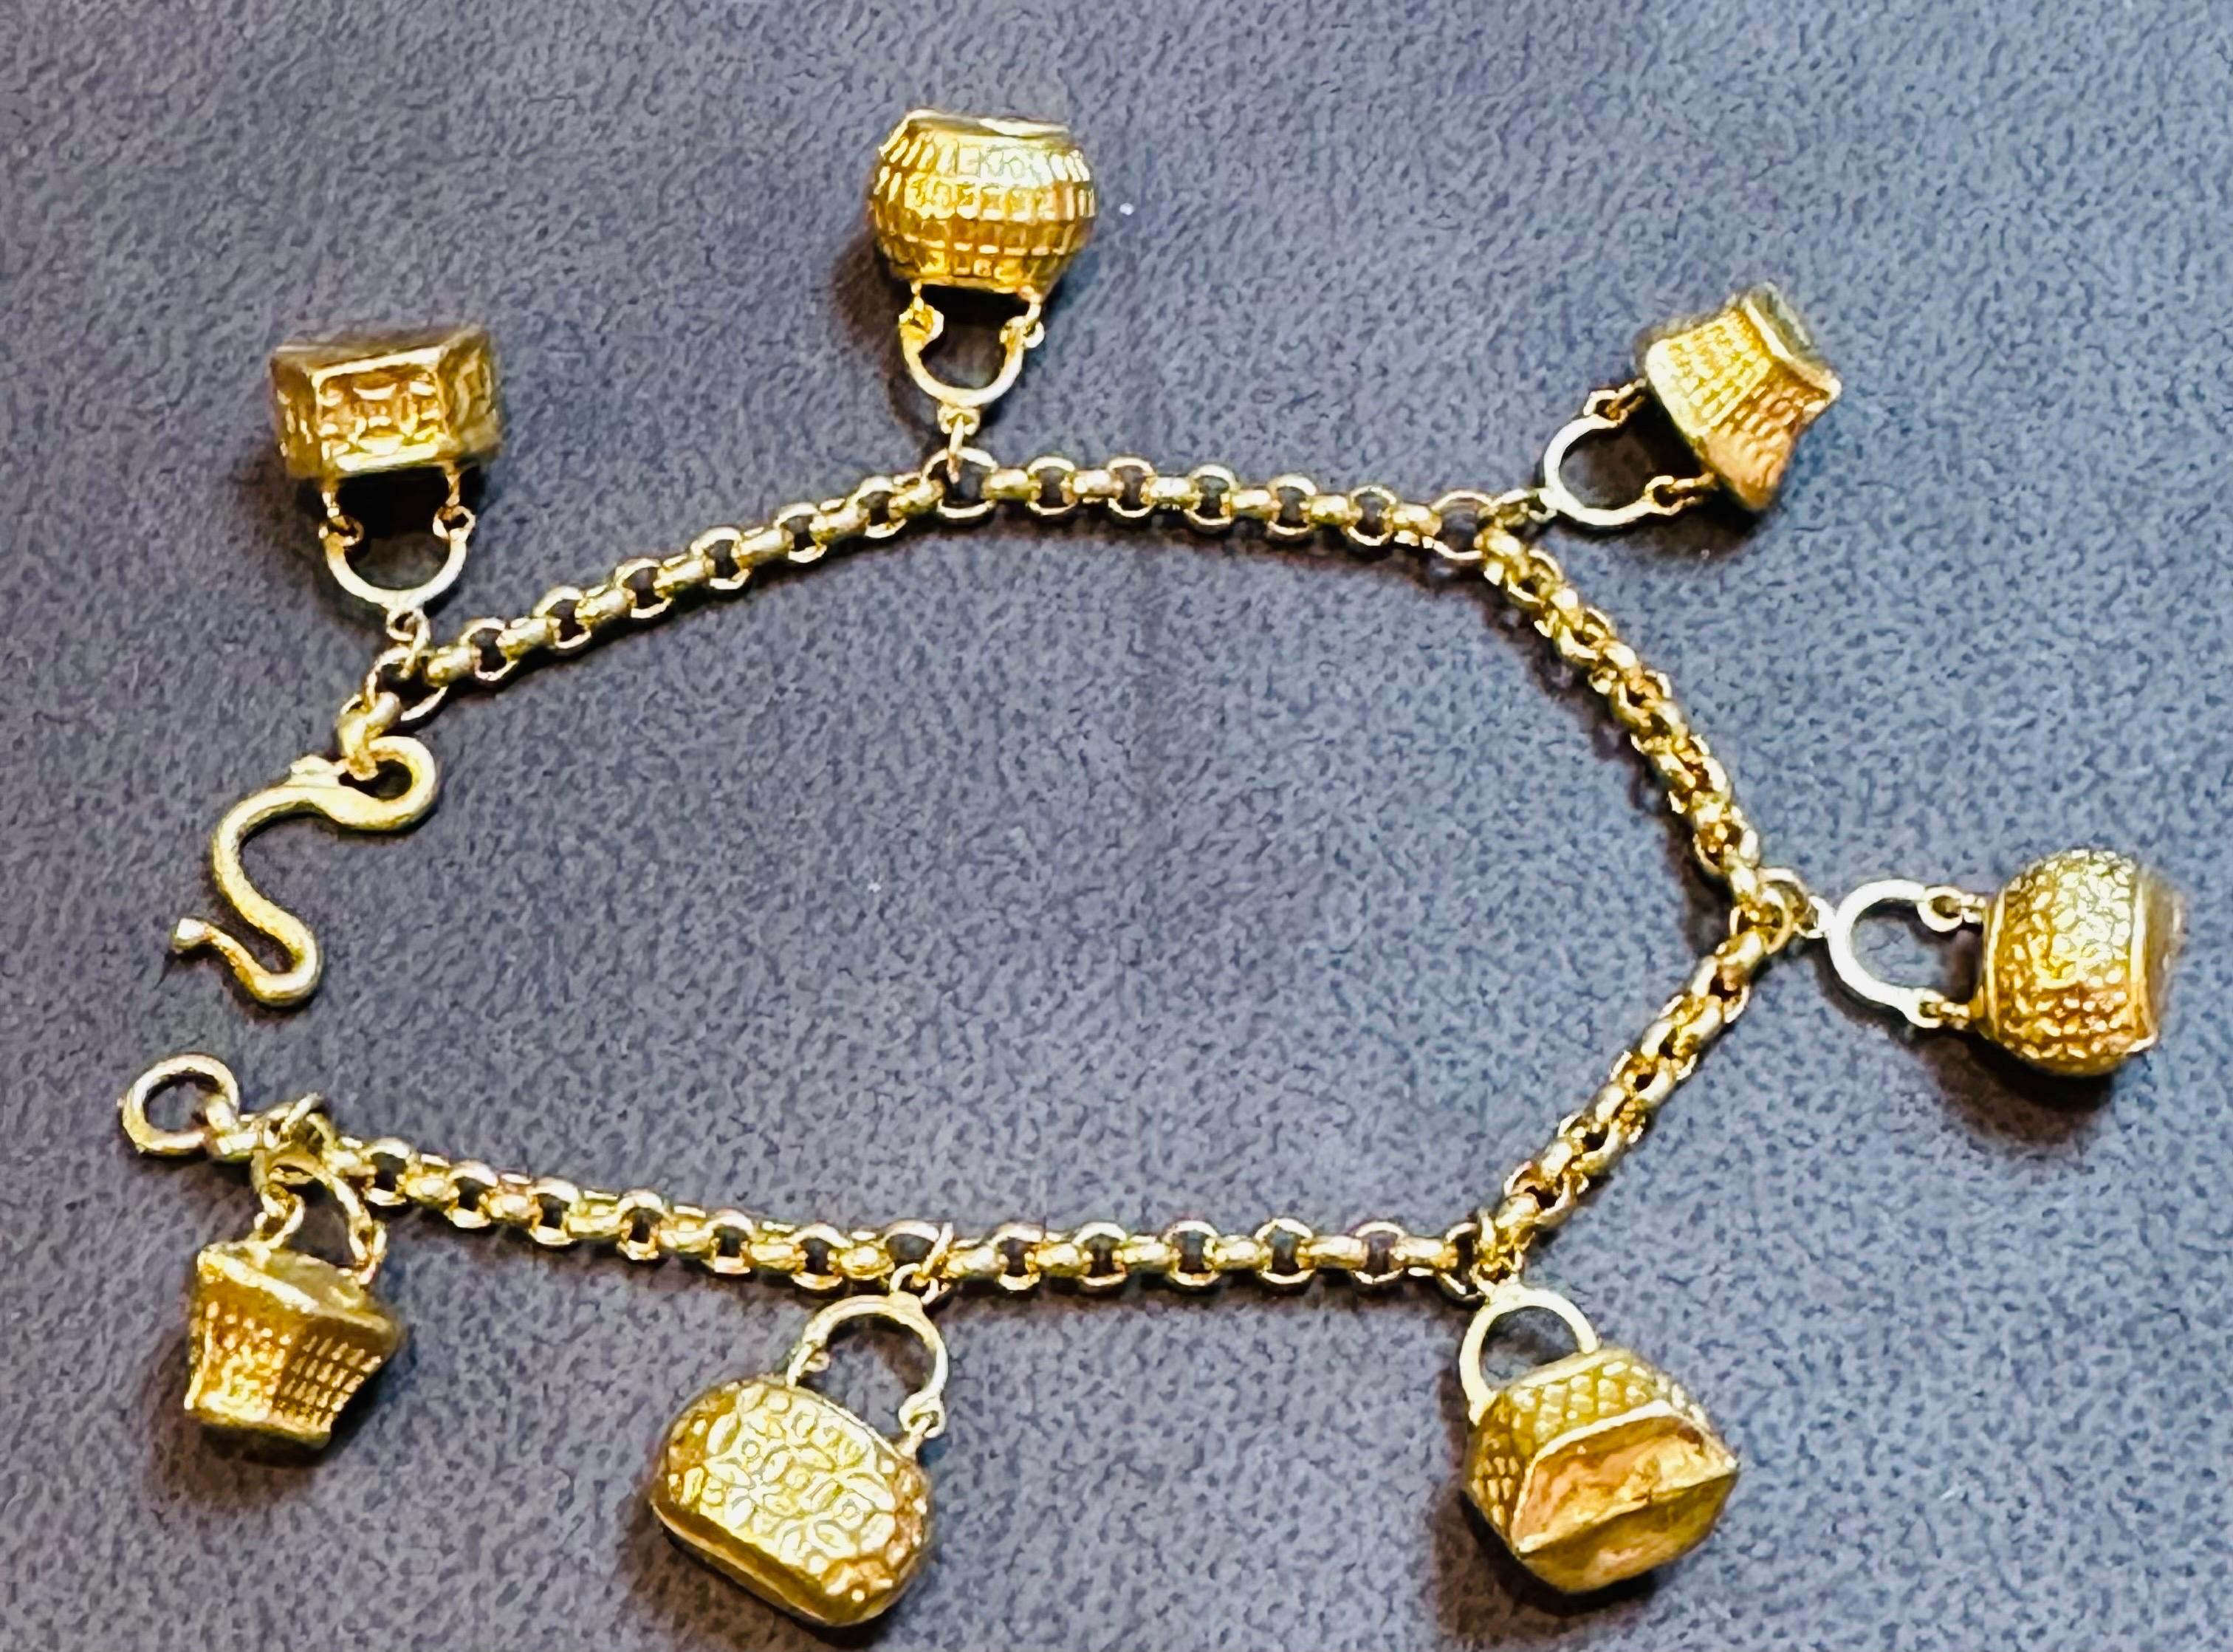 24 Karat Yellow Pure Gold 15.5 Gm Charm Bracelet with 7 Basket Charms For Sale 1